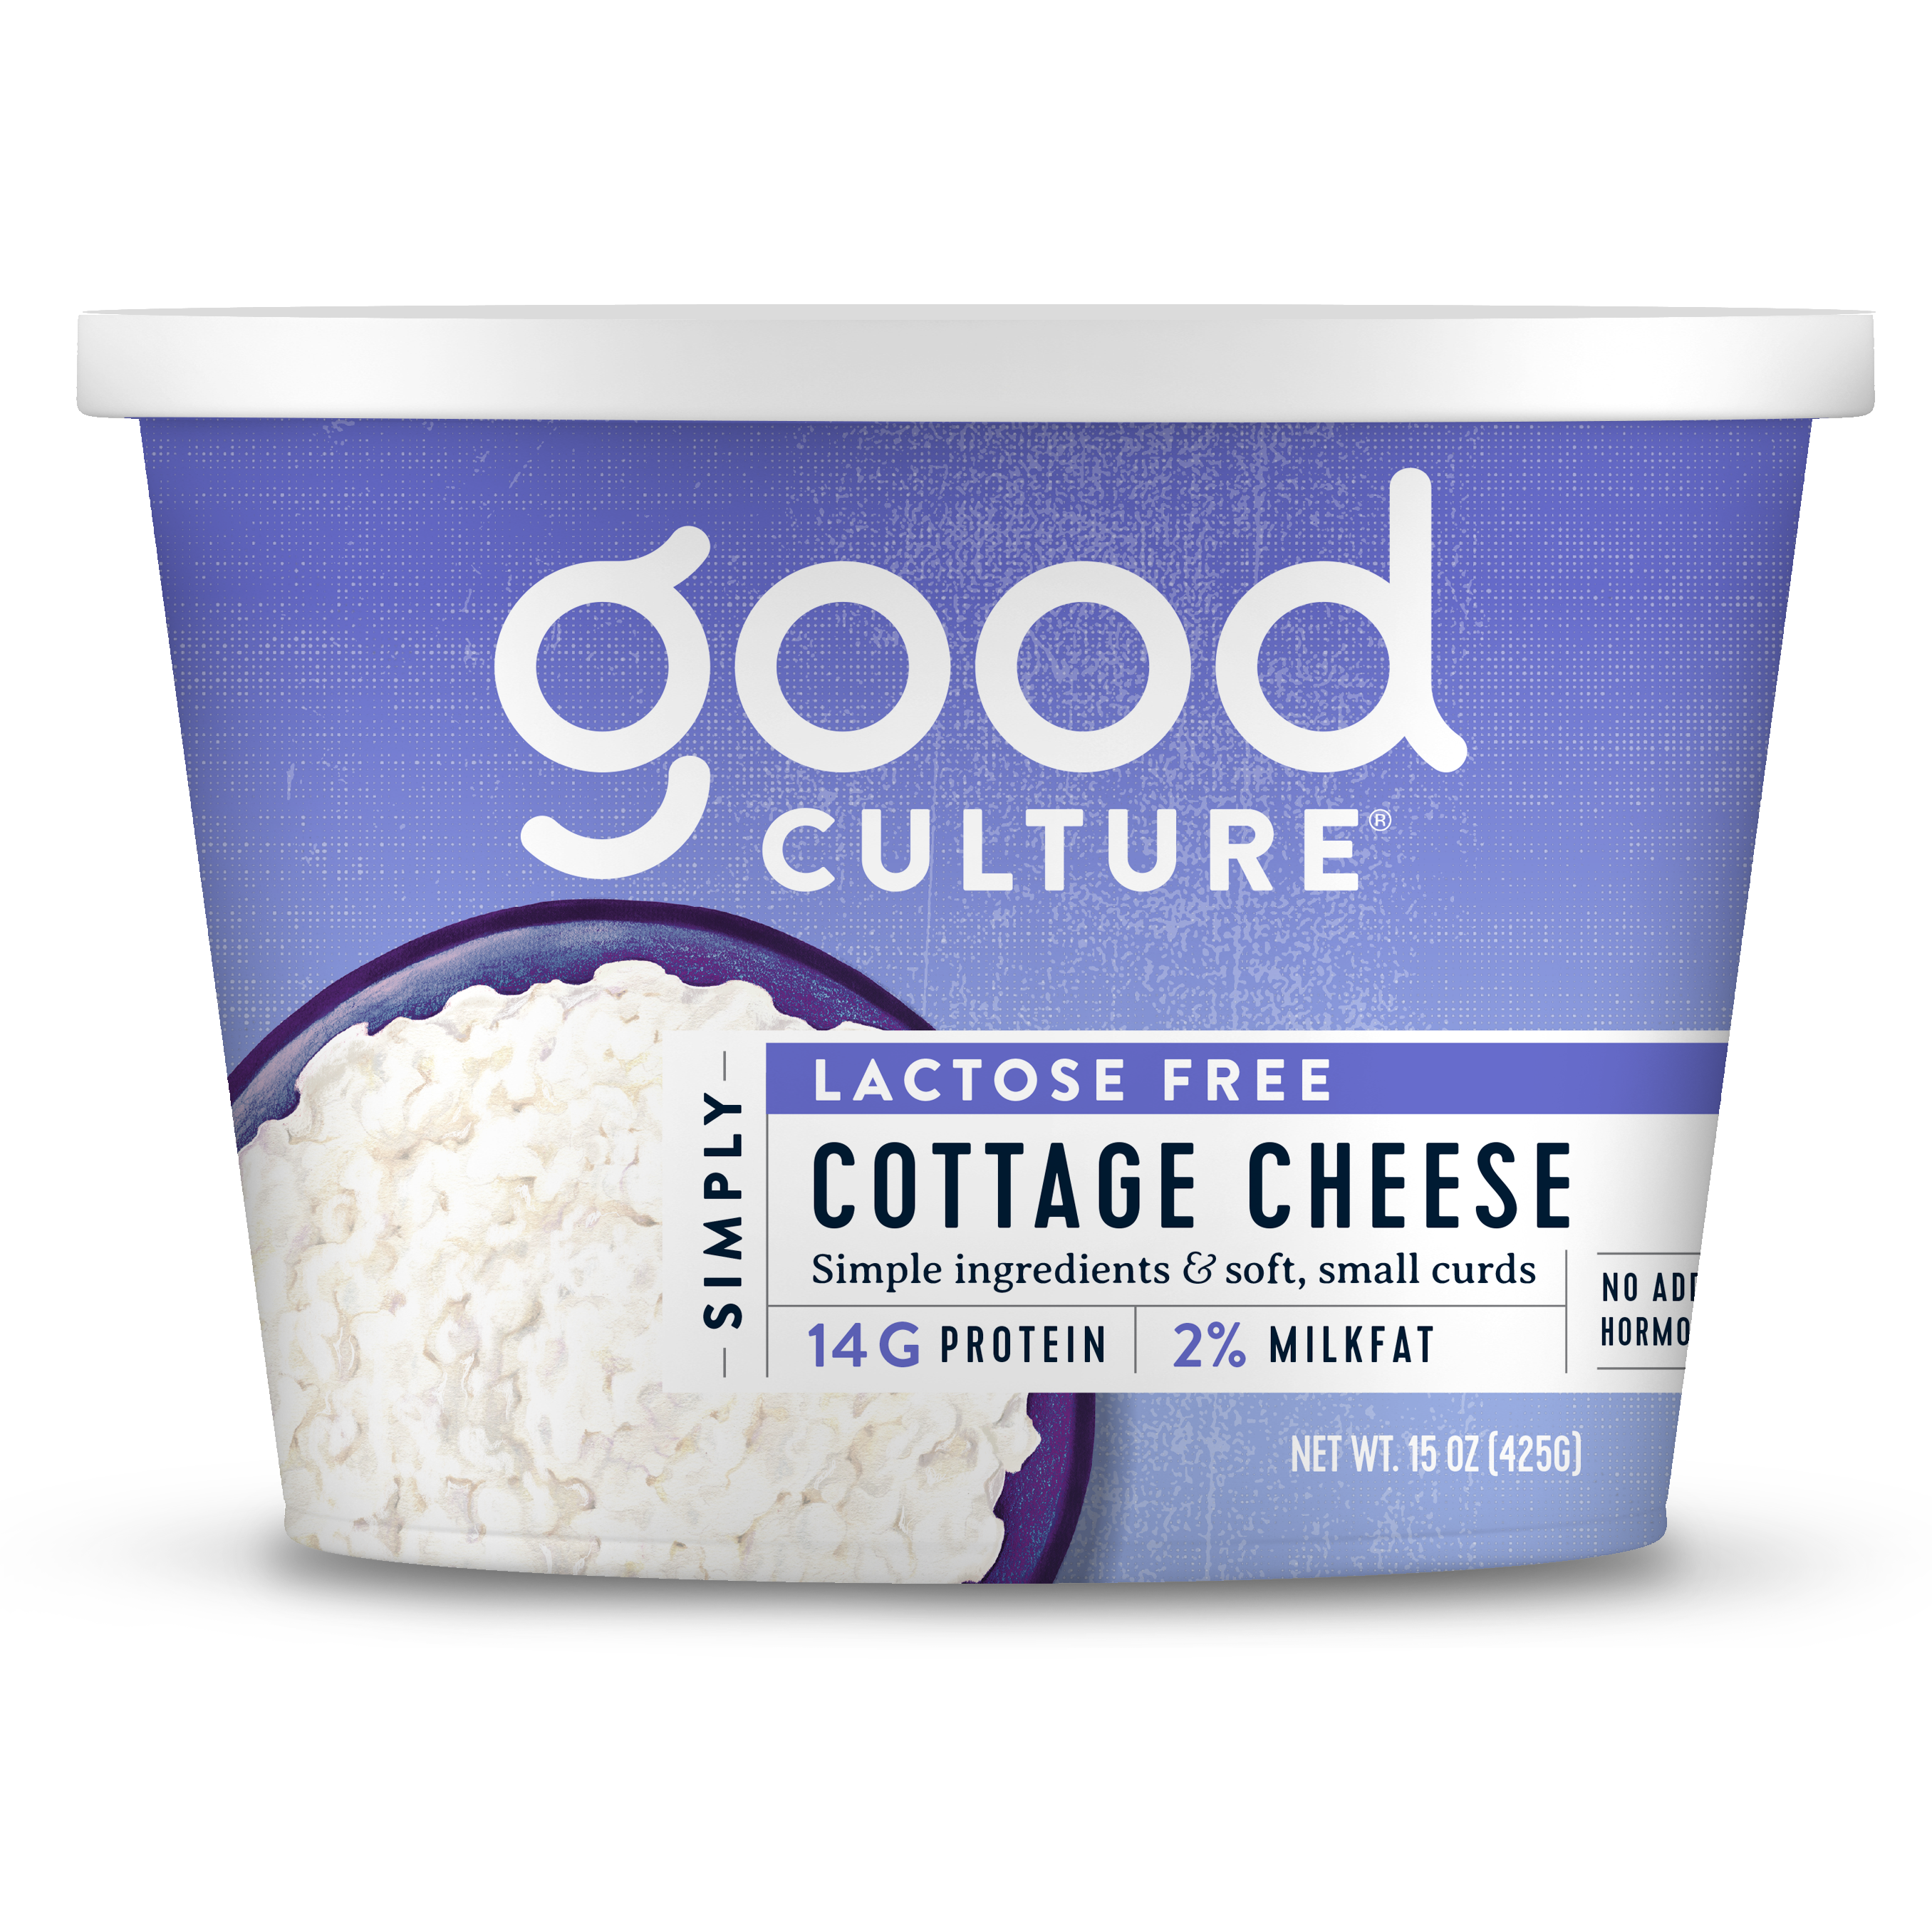 Simply Lactose-Free Cottage Cheese 